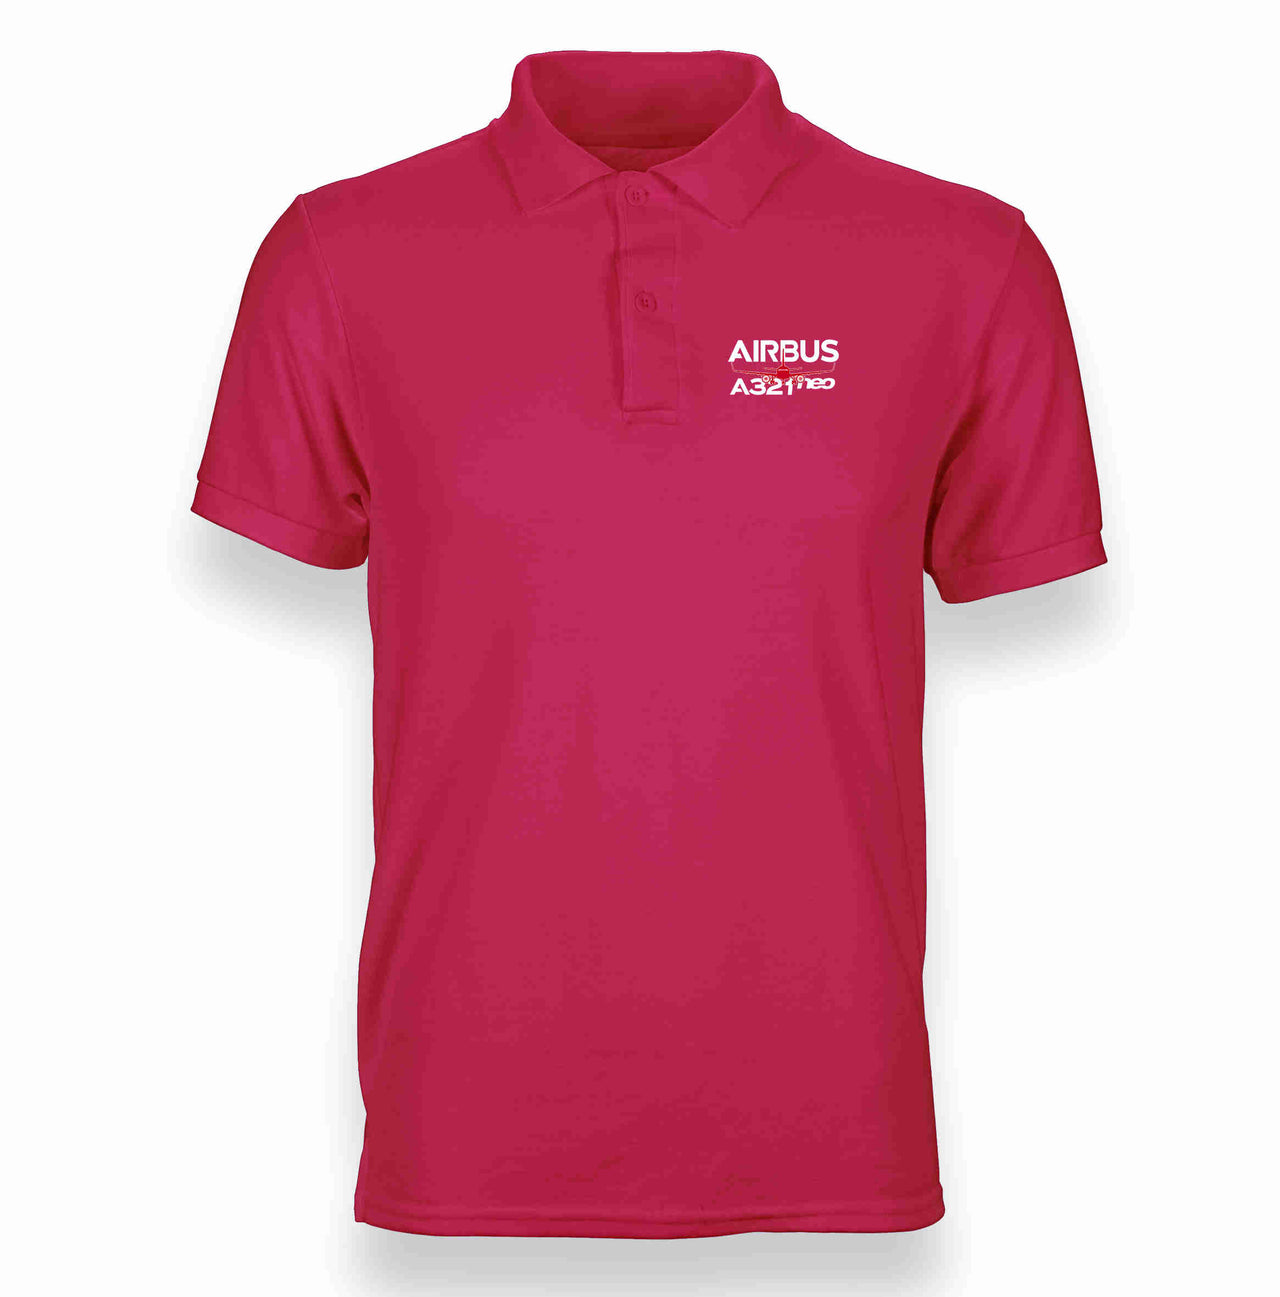 Amazing Airbus A321neo Designed "WOMEN" Polo T-Shirts